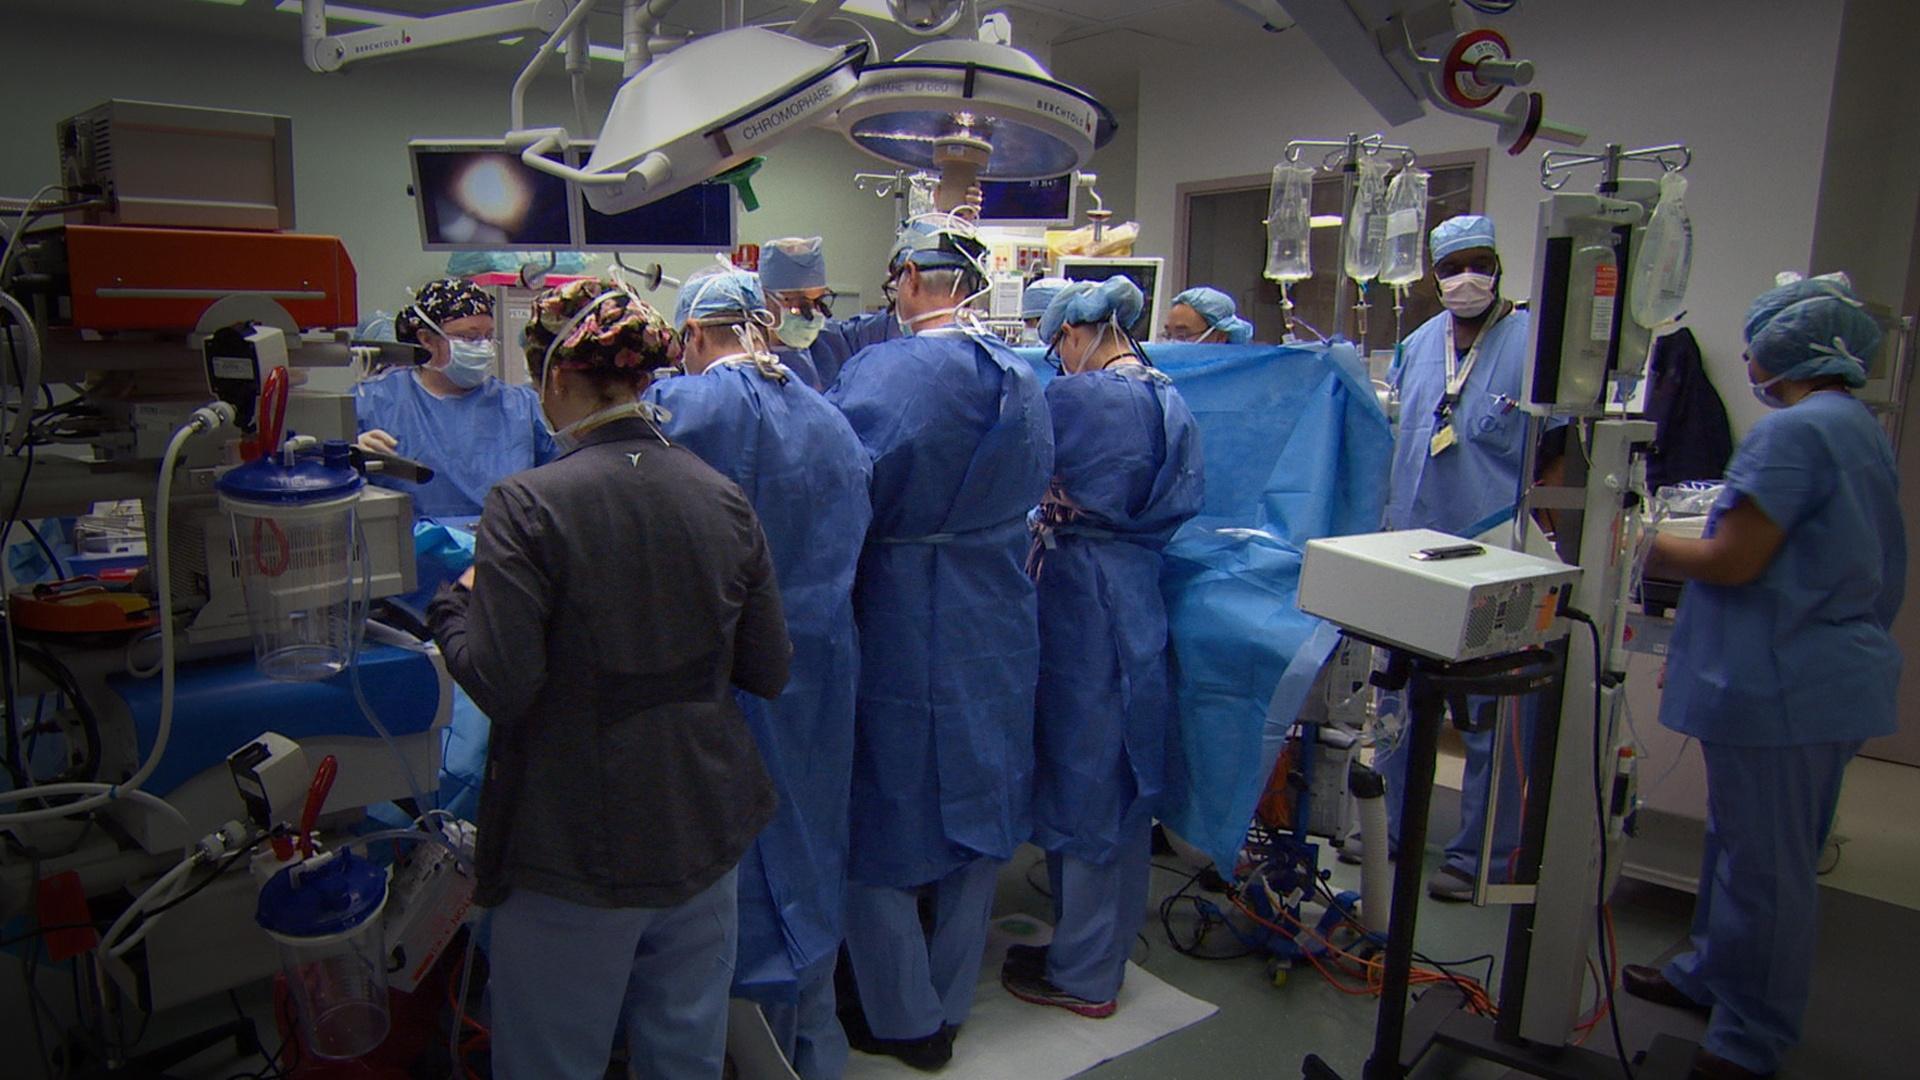 Surgeons begin fetal surgery for Spina Biﬁda on a baby of 23 weeks gestation.